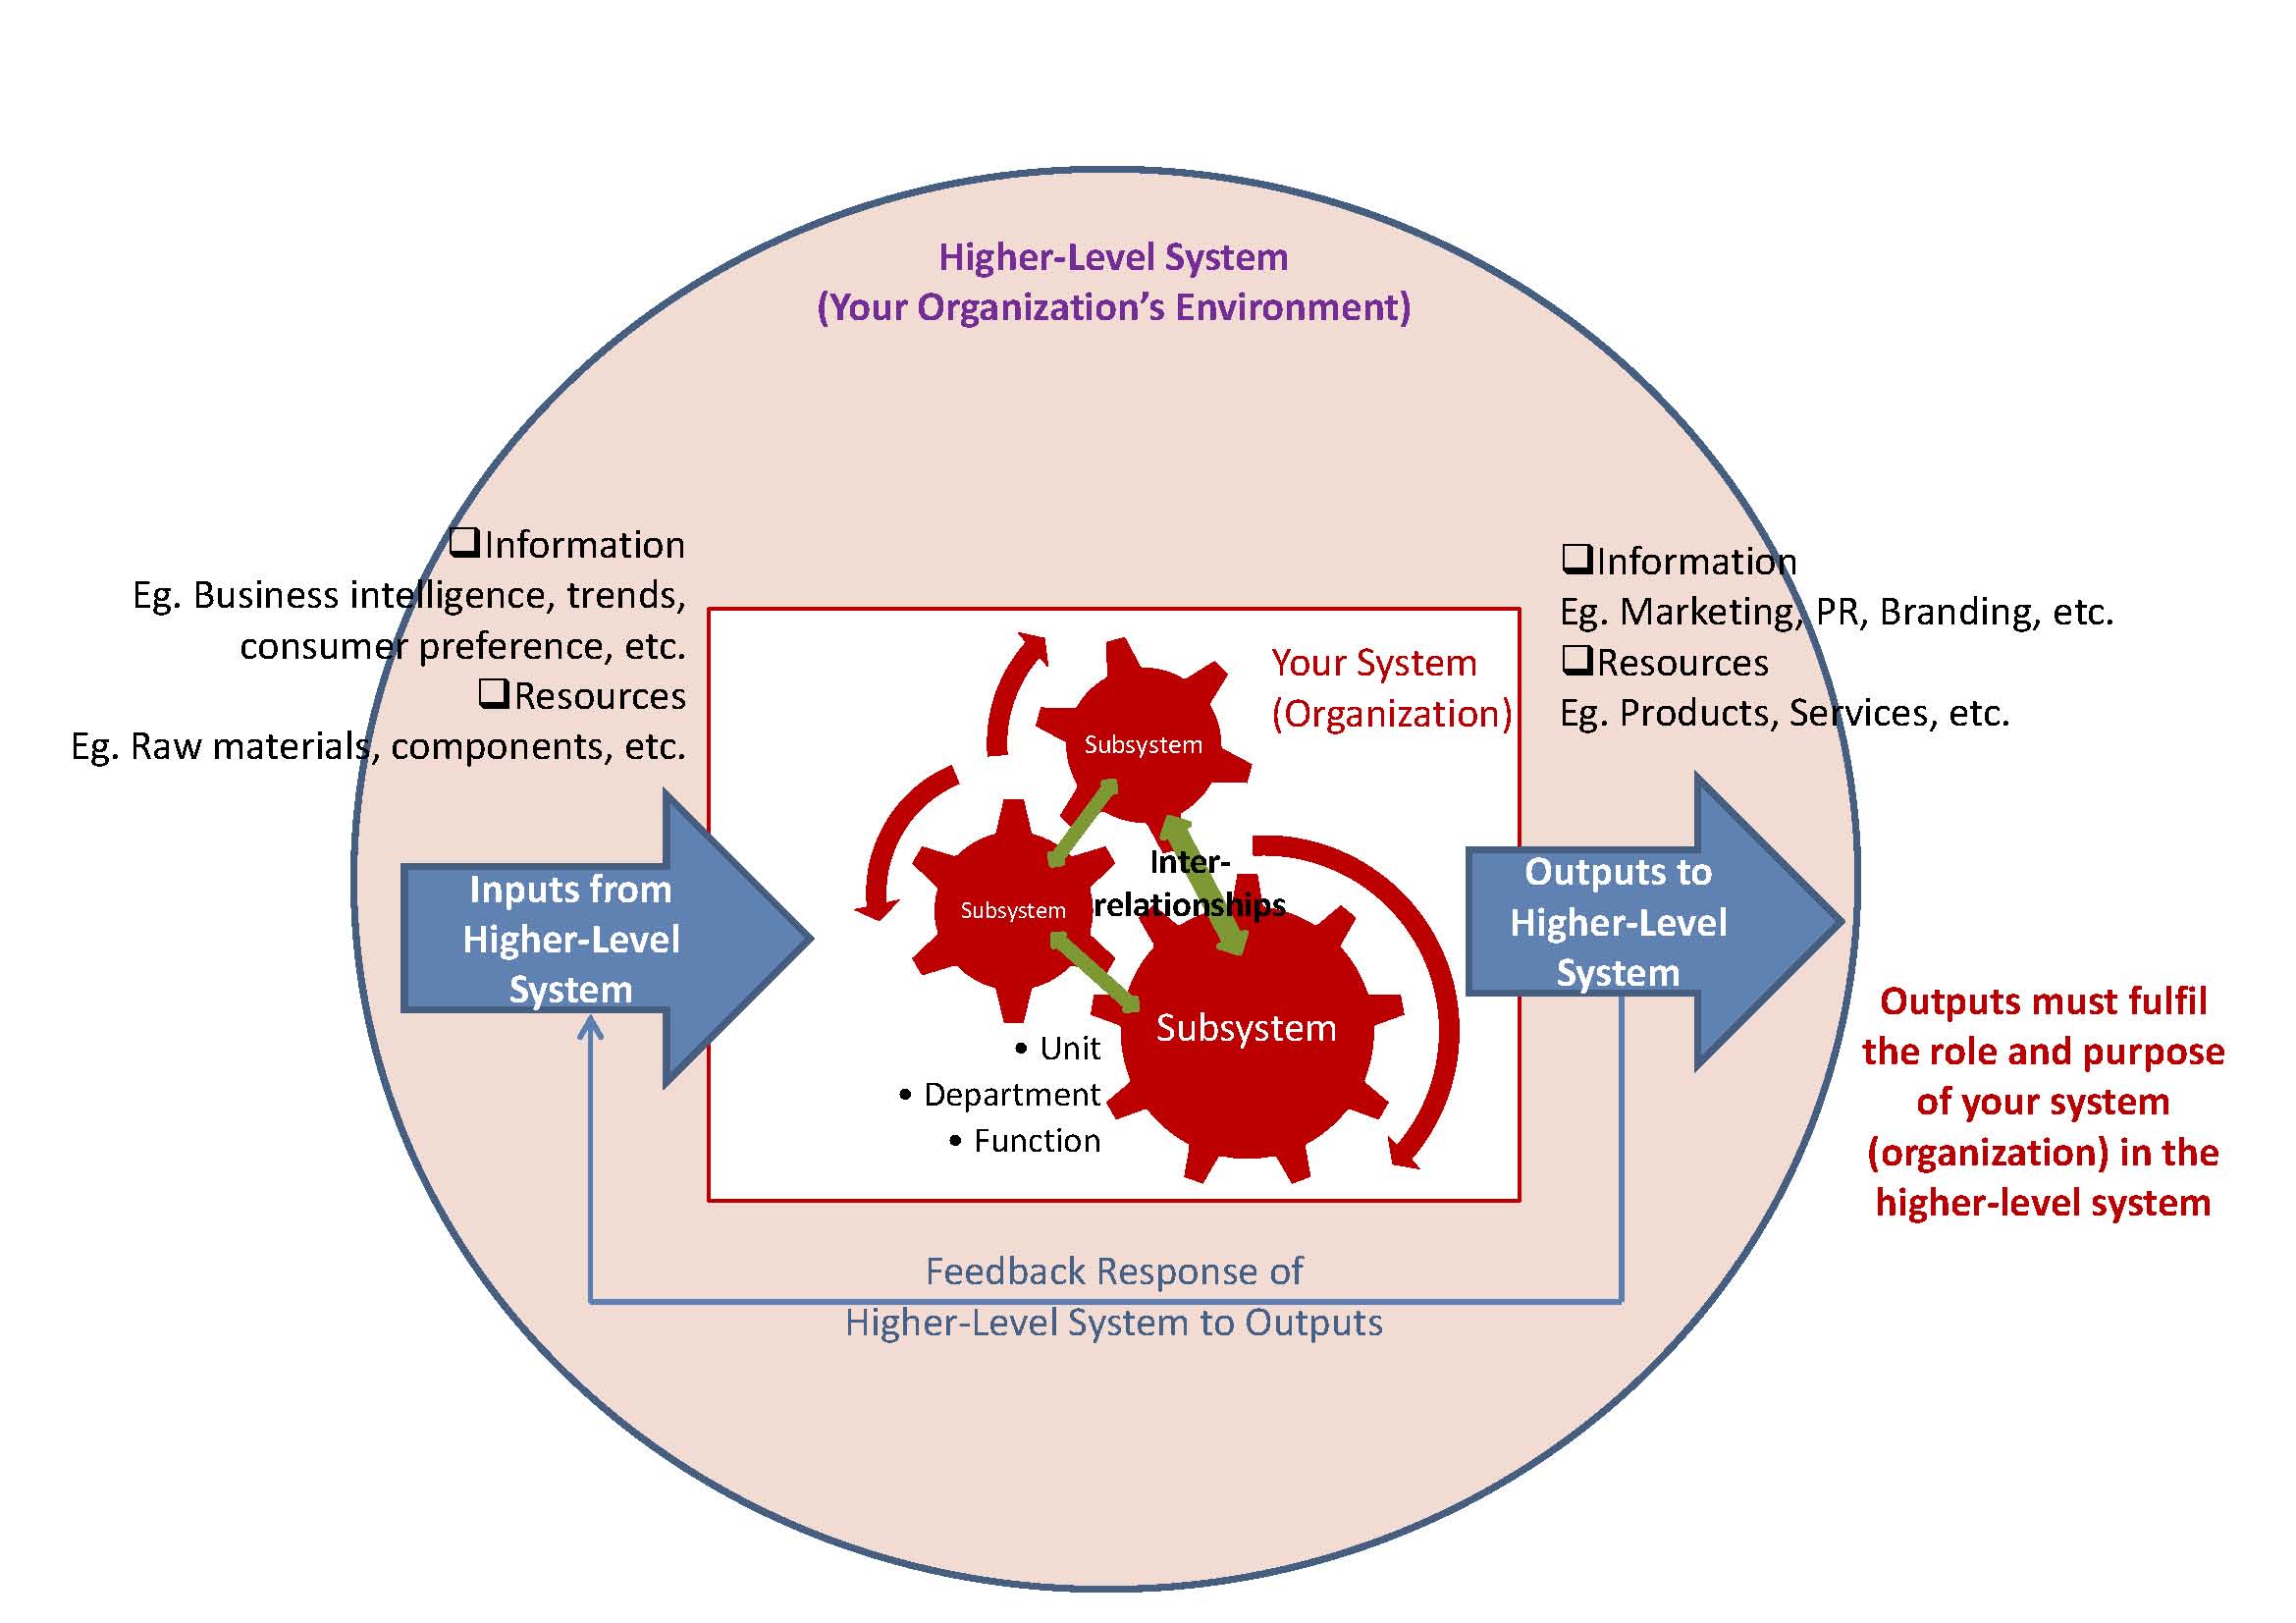 Graphic titled "Higher-Level System (Your Organization's Environment)." On the left, there is an arrow labeled "inputs from high-level system." The arrow points to a set of gears titled "Your System (Organization)." Each gear is labeled "subsystem" and arrows between the gears indicate interrelationships. Bullet points by the gears say "unit", "department", and "function." Pointing away from the gears is an arrow labeled "outputs to higher-level system. Outputs must fulfil the role and purpose of your system (organization) in the higher-level system." Above the "inputs" arrow is a checklist which reads "Information (e.g., business intelligence, trends, consumer preference, etc.; Resources, e.g., raw materials, components, etc." Above the Outputs arrow, there is a checklist which reads "Information, e.g., marketing, PR, branding, etc.; Resources, e.g., products, services, etc.". There is a final, thin arrow leading from the outputs arrow to the inputs arrow with the label "Feedback response of higher-level system to outputs."  